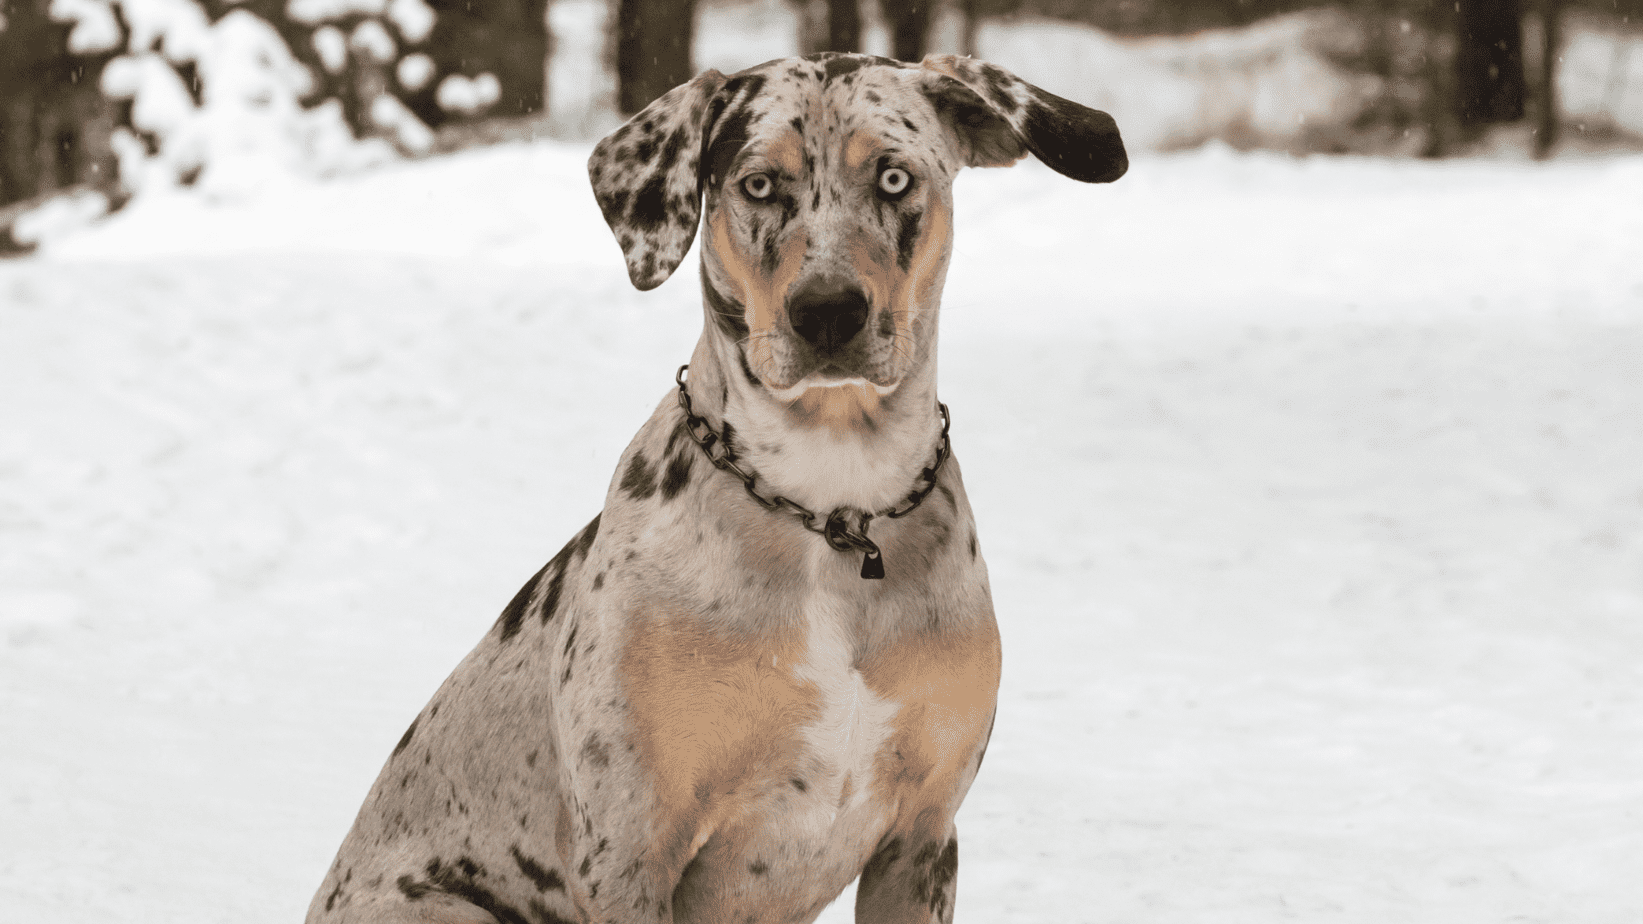 Catahoula Leopard Dog standing in snow